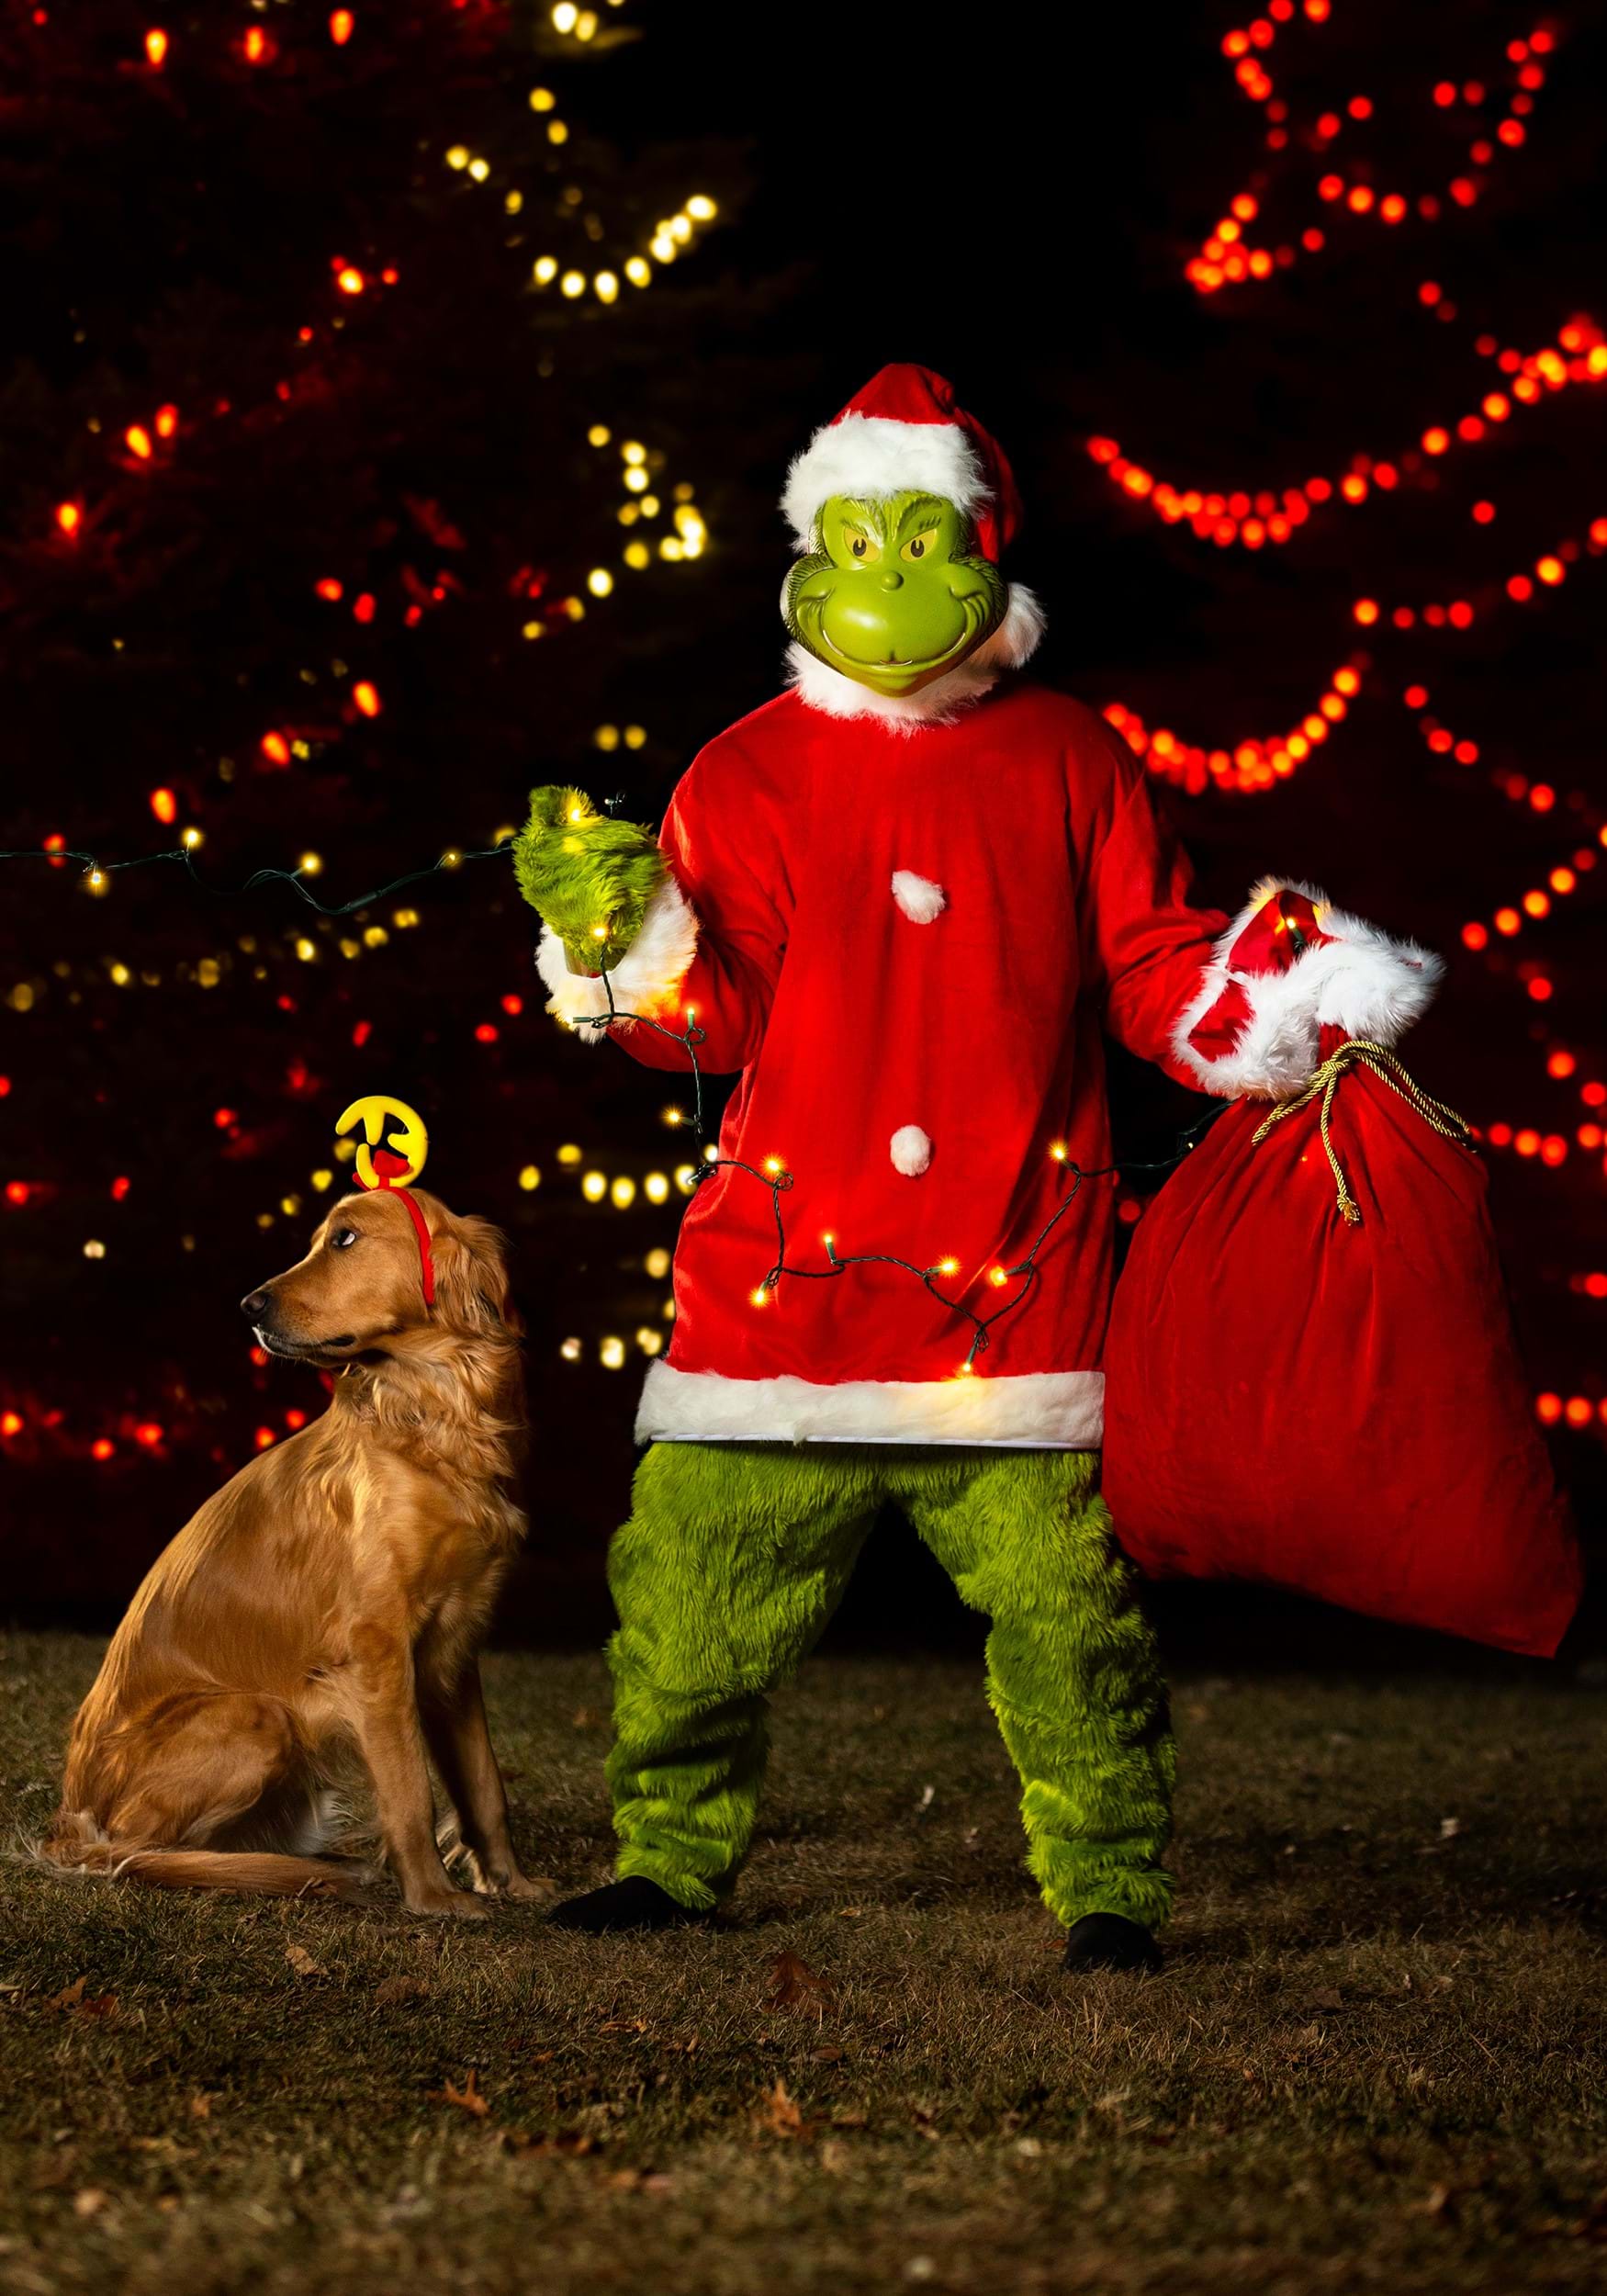 The Grinch Santa Deluxe Jumpsuit with Mask Costume for Men